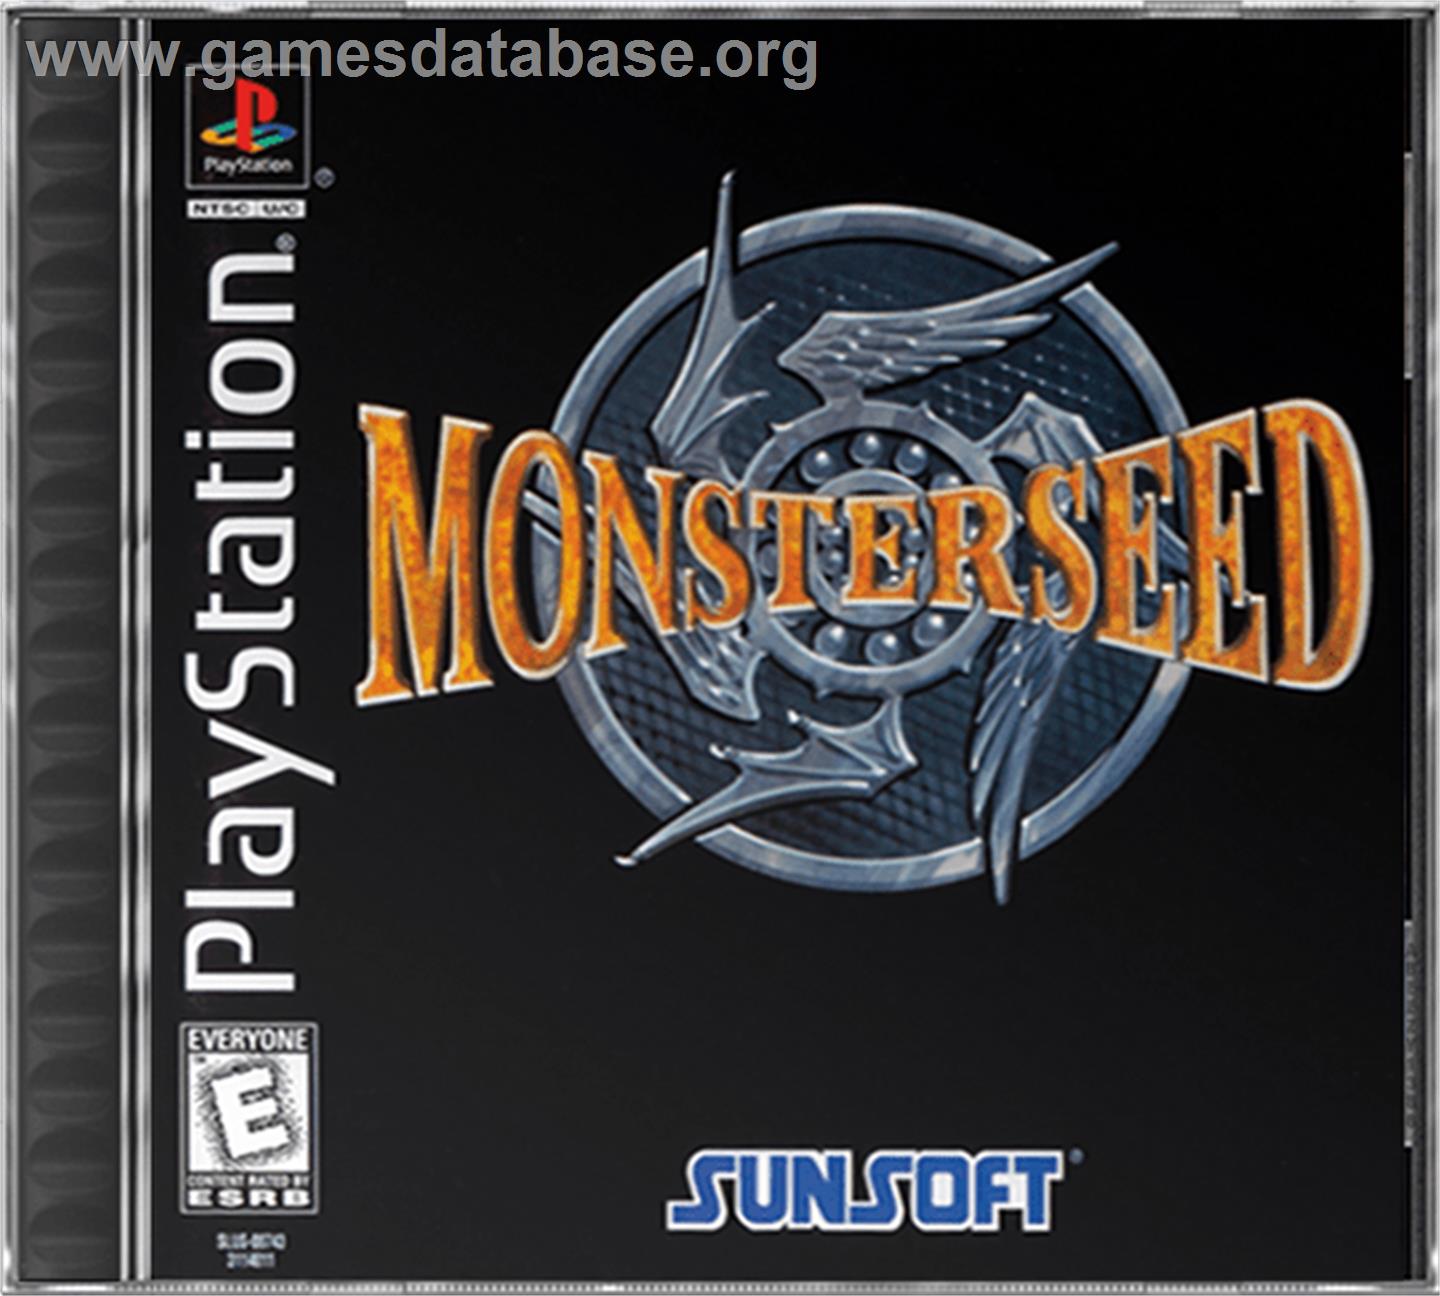 Monster Seed - Sony Playstation - Artwork - Box